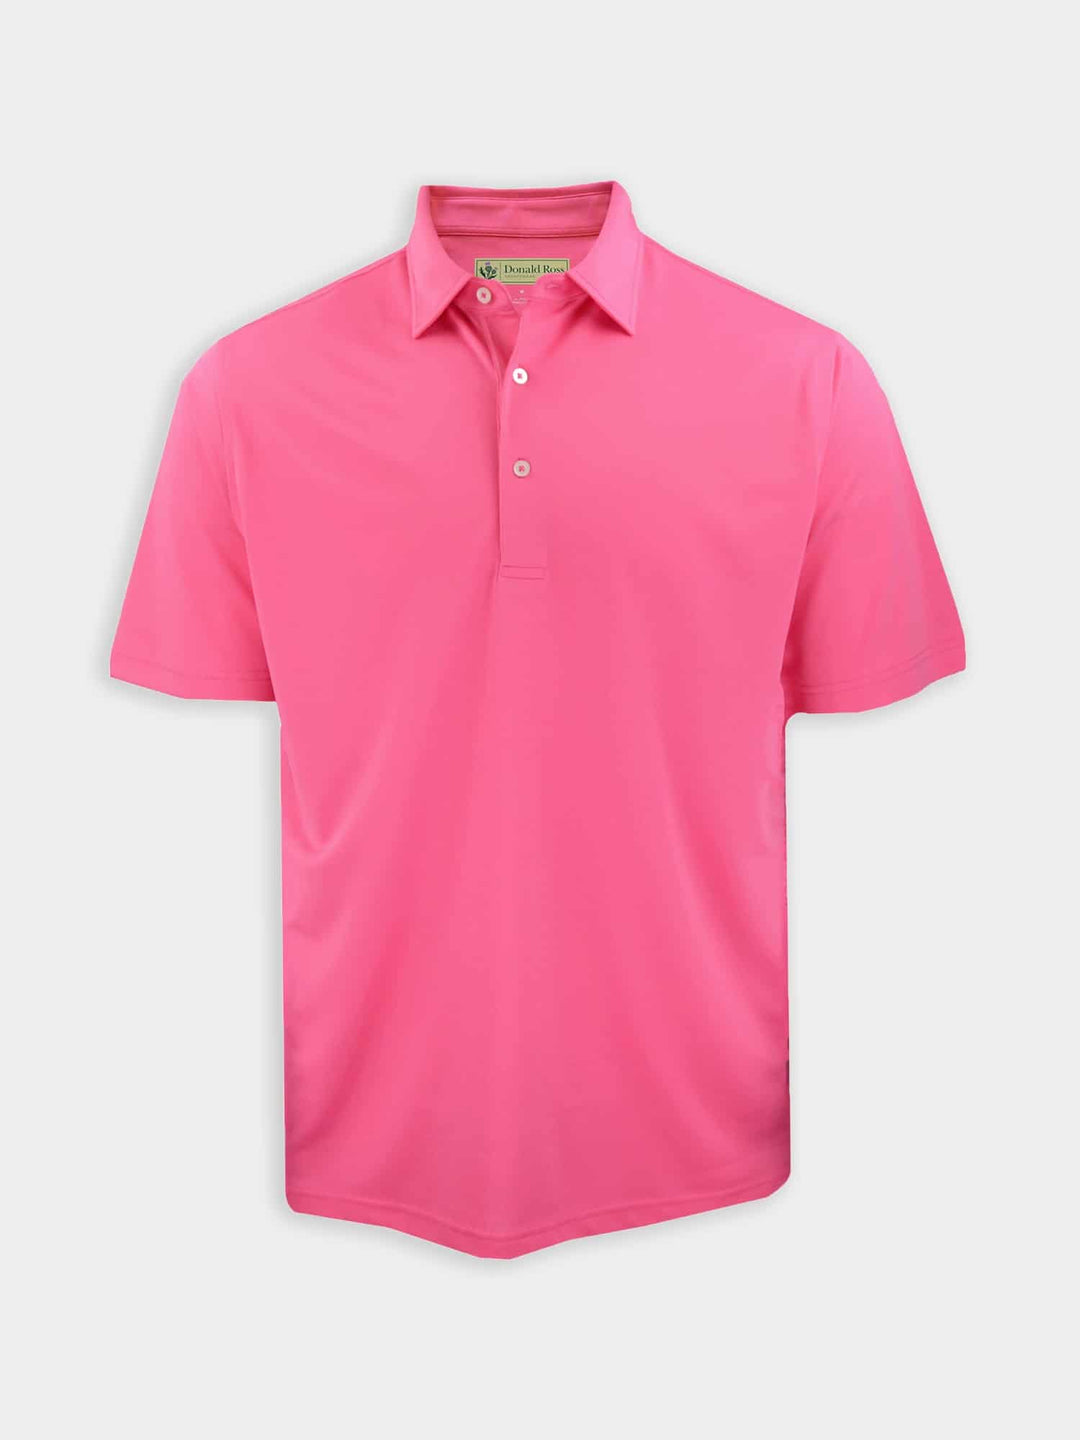 Donald Ross Mens Solid Pique Self Collar Performance Polo - PINK BERRY